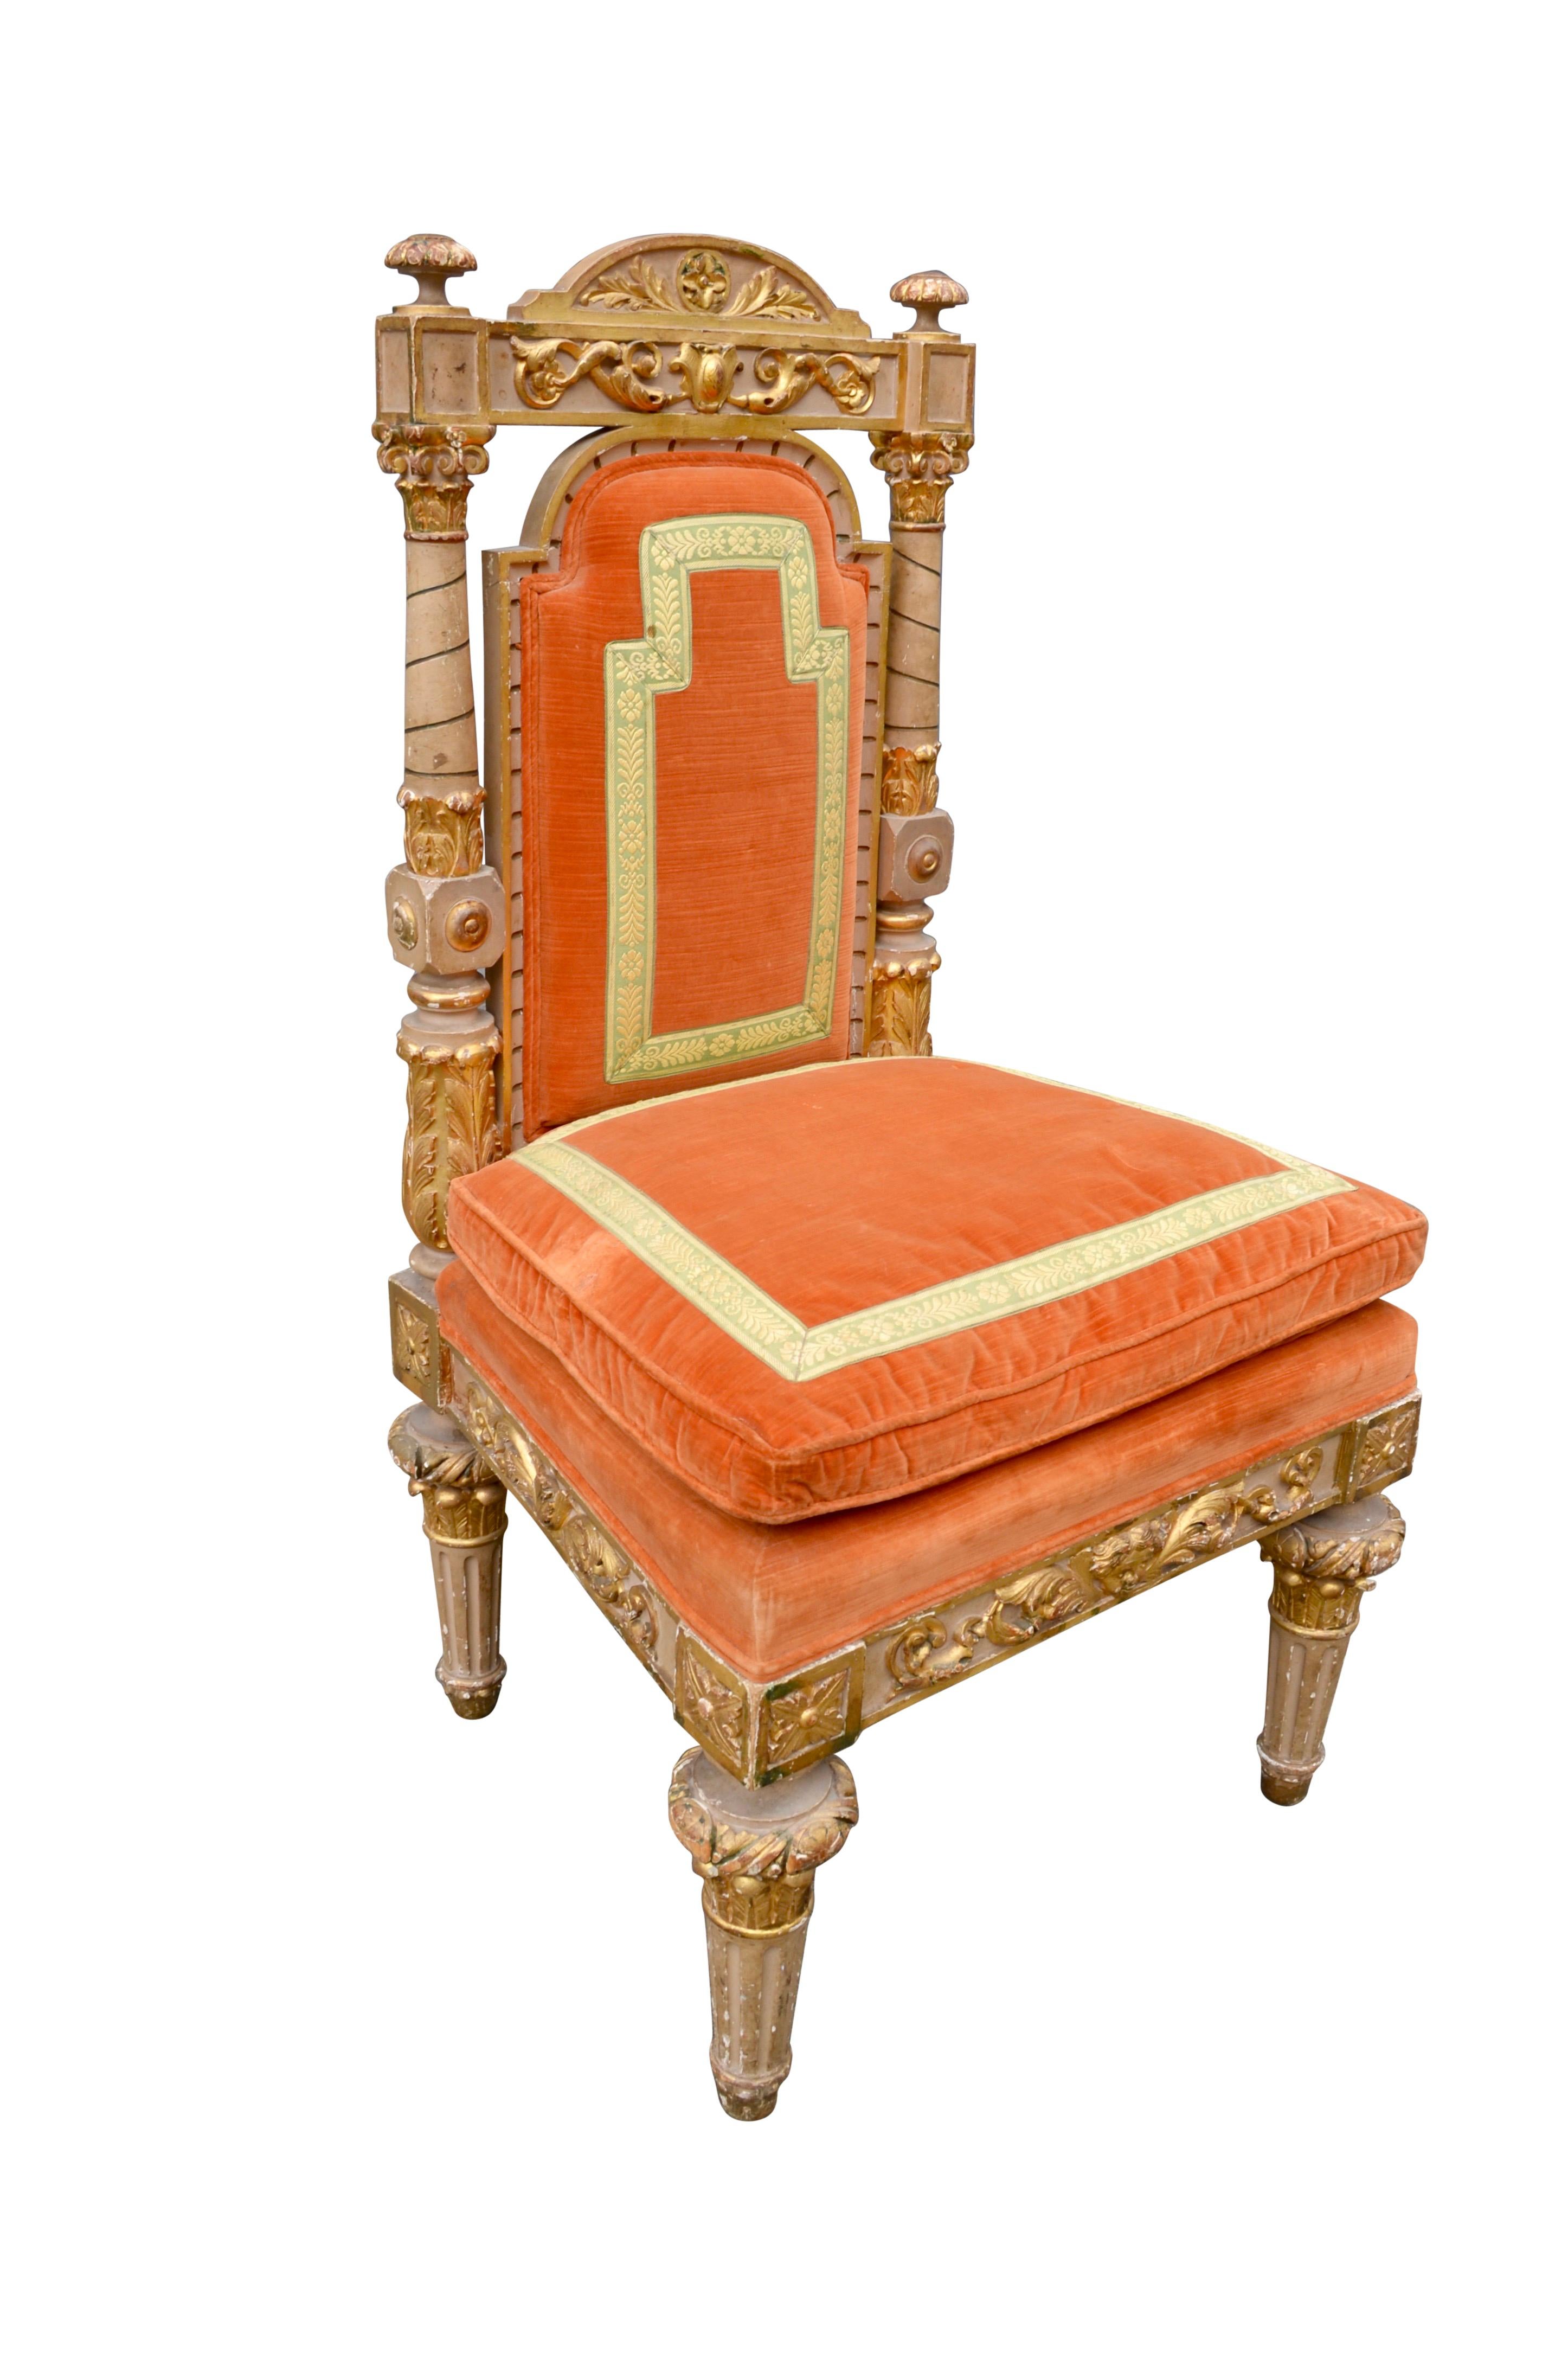 Hand-Painted 18th C Italian Piedmontese Carved Gilded Chair For Sale